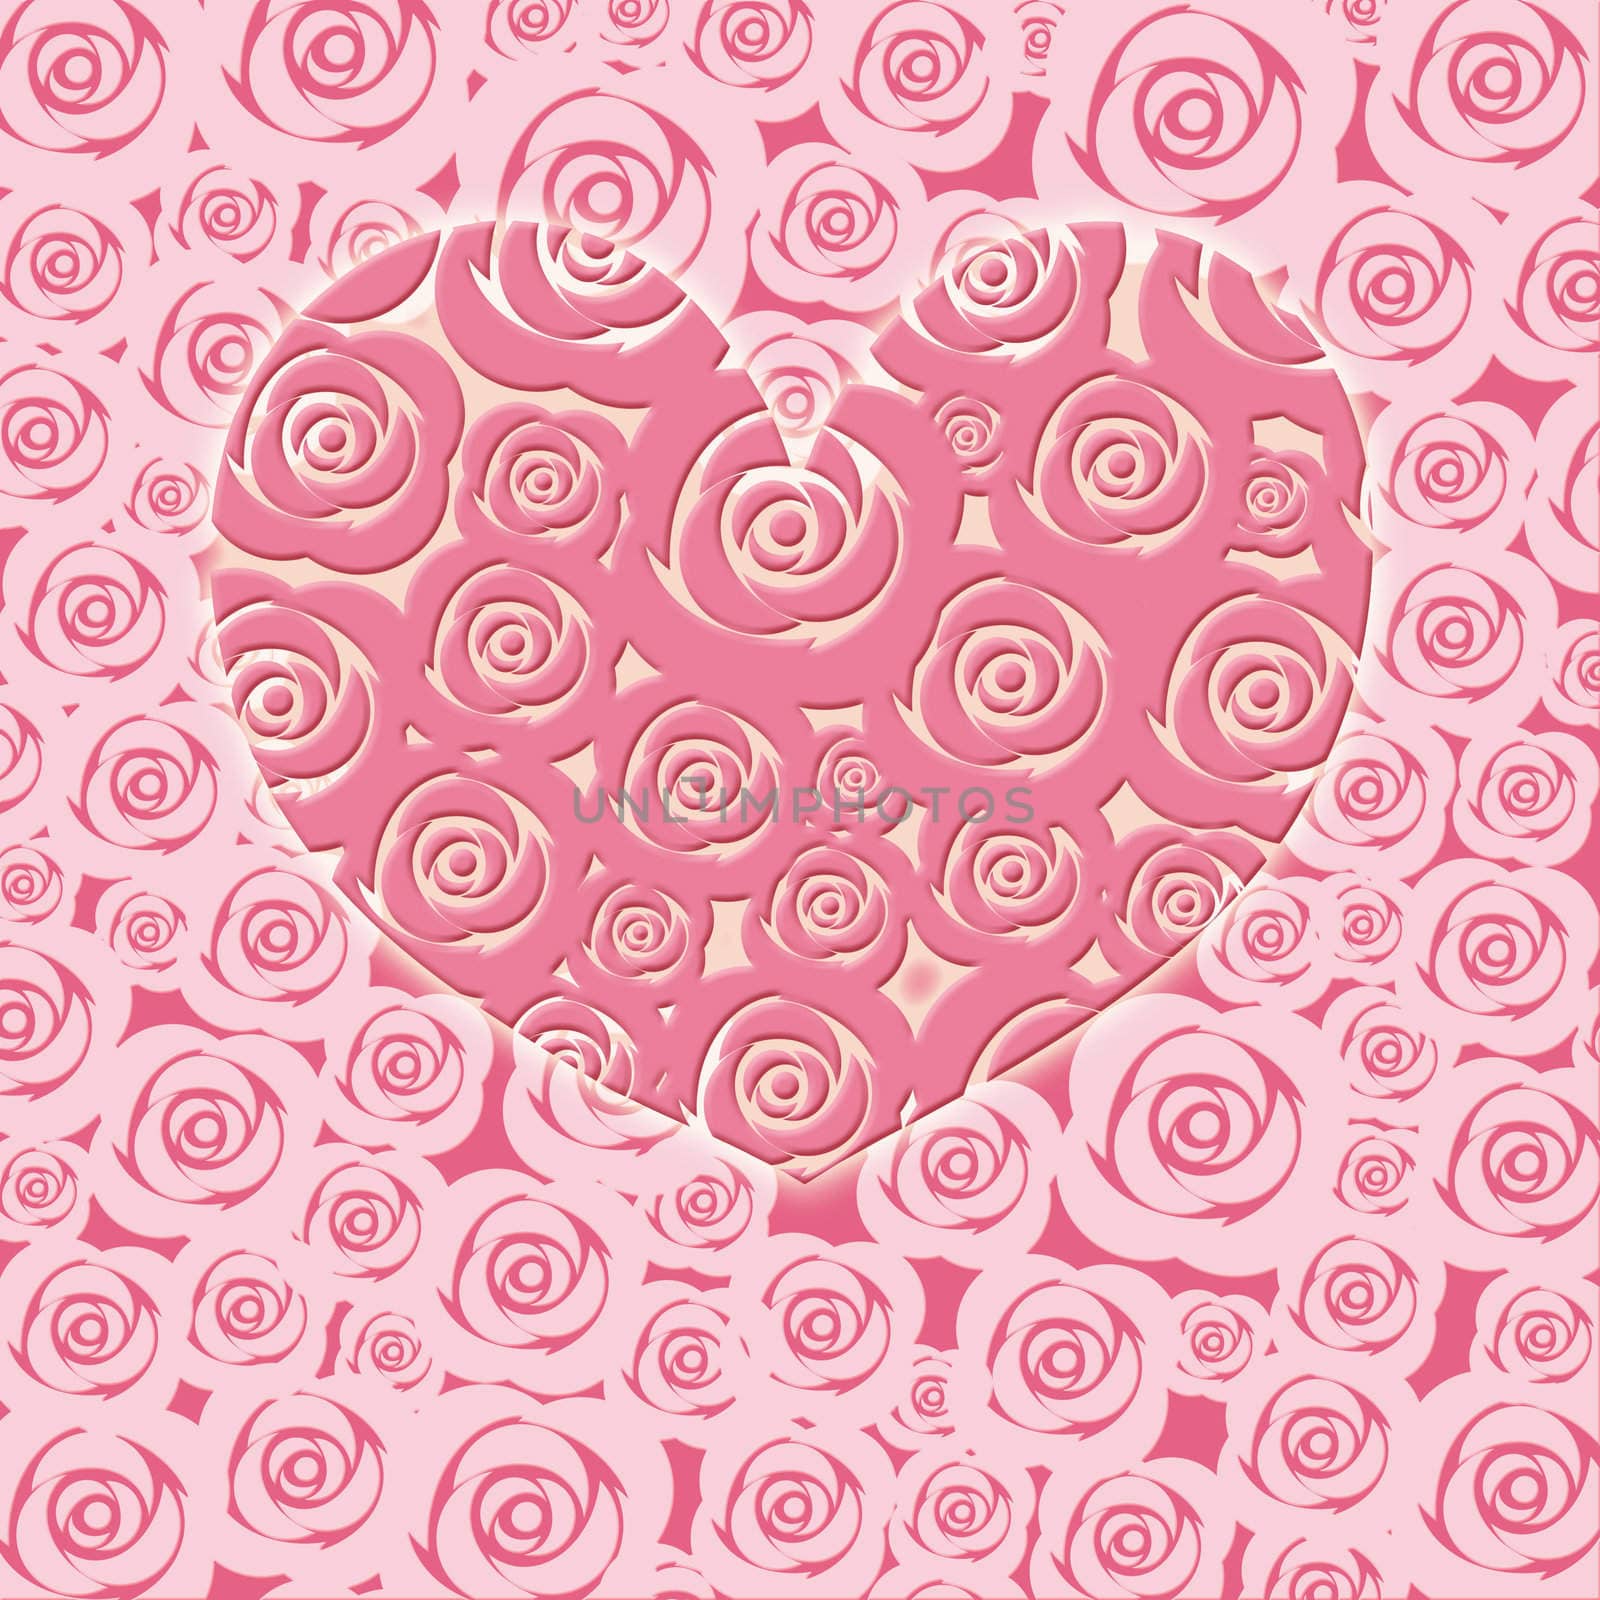 Happy Valentines Day Heart with Pink Roses Illustration